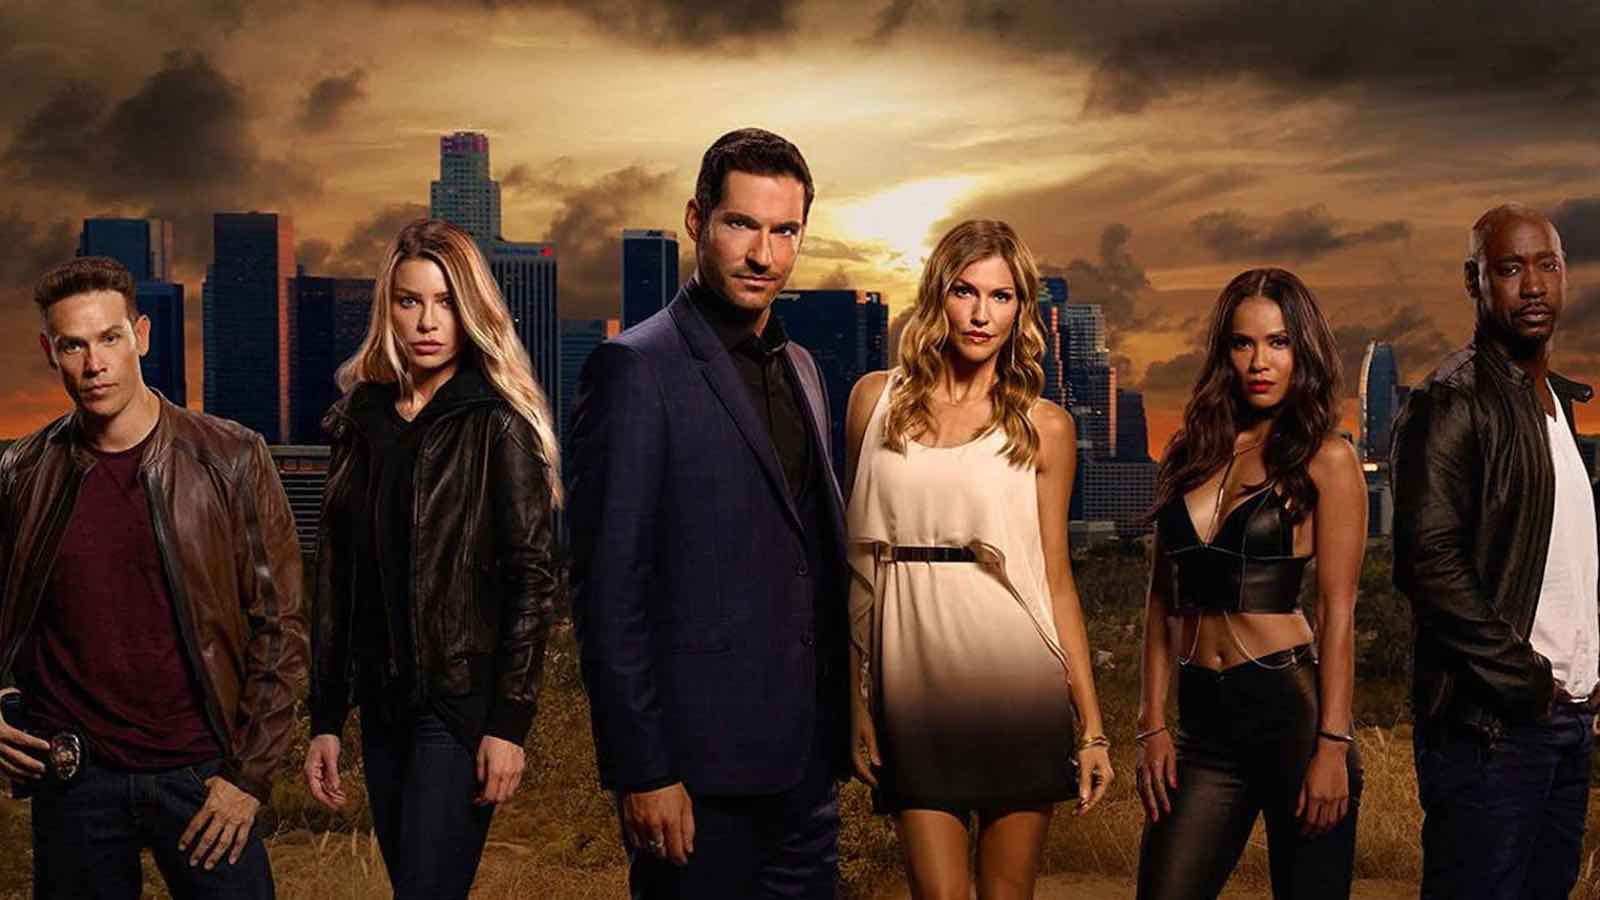 Lucifer: Season 5' To Release This [Spoiler] On Netflix! Check Out